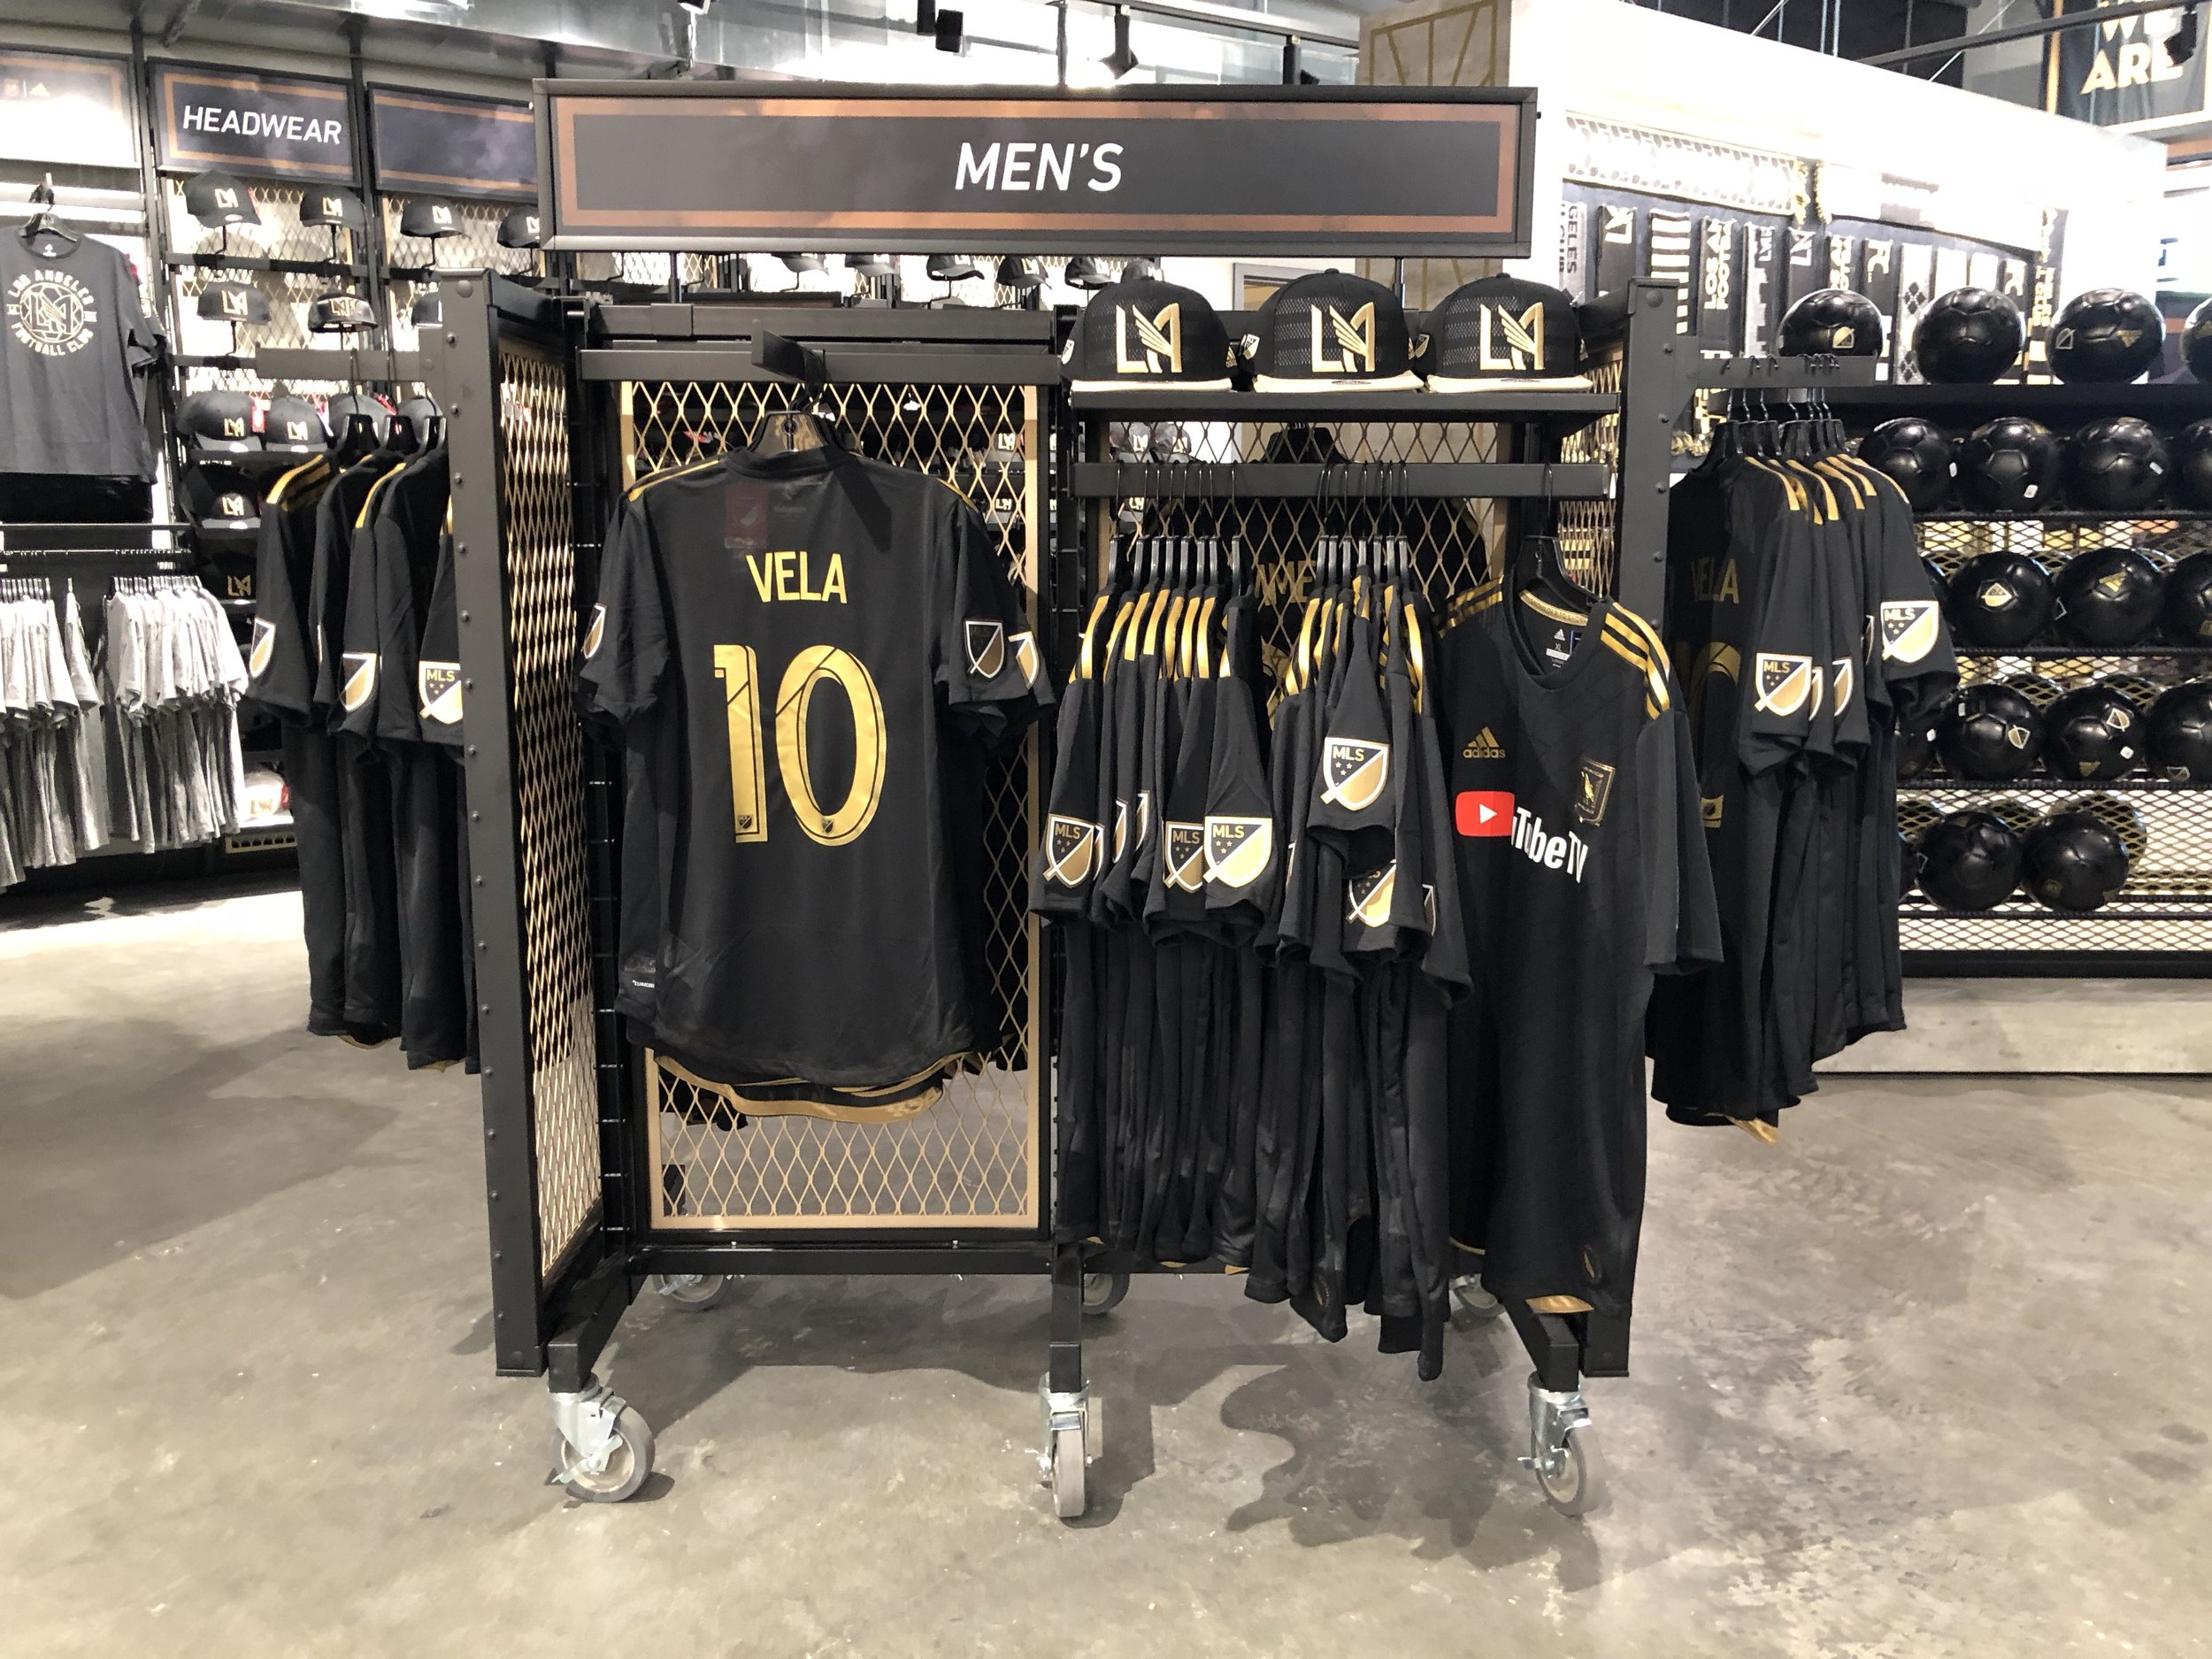 lafc official store